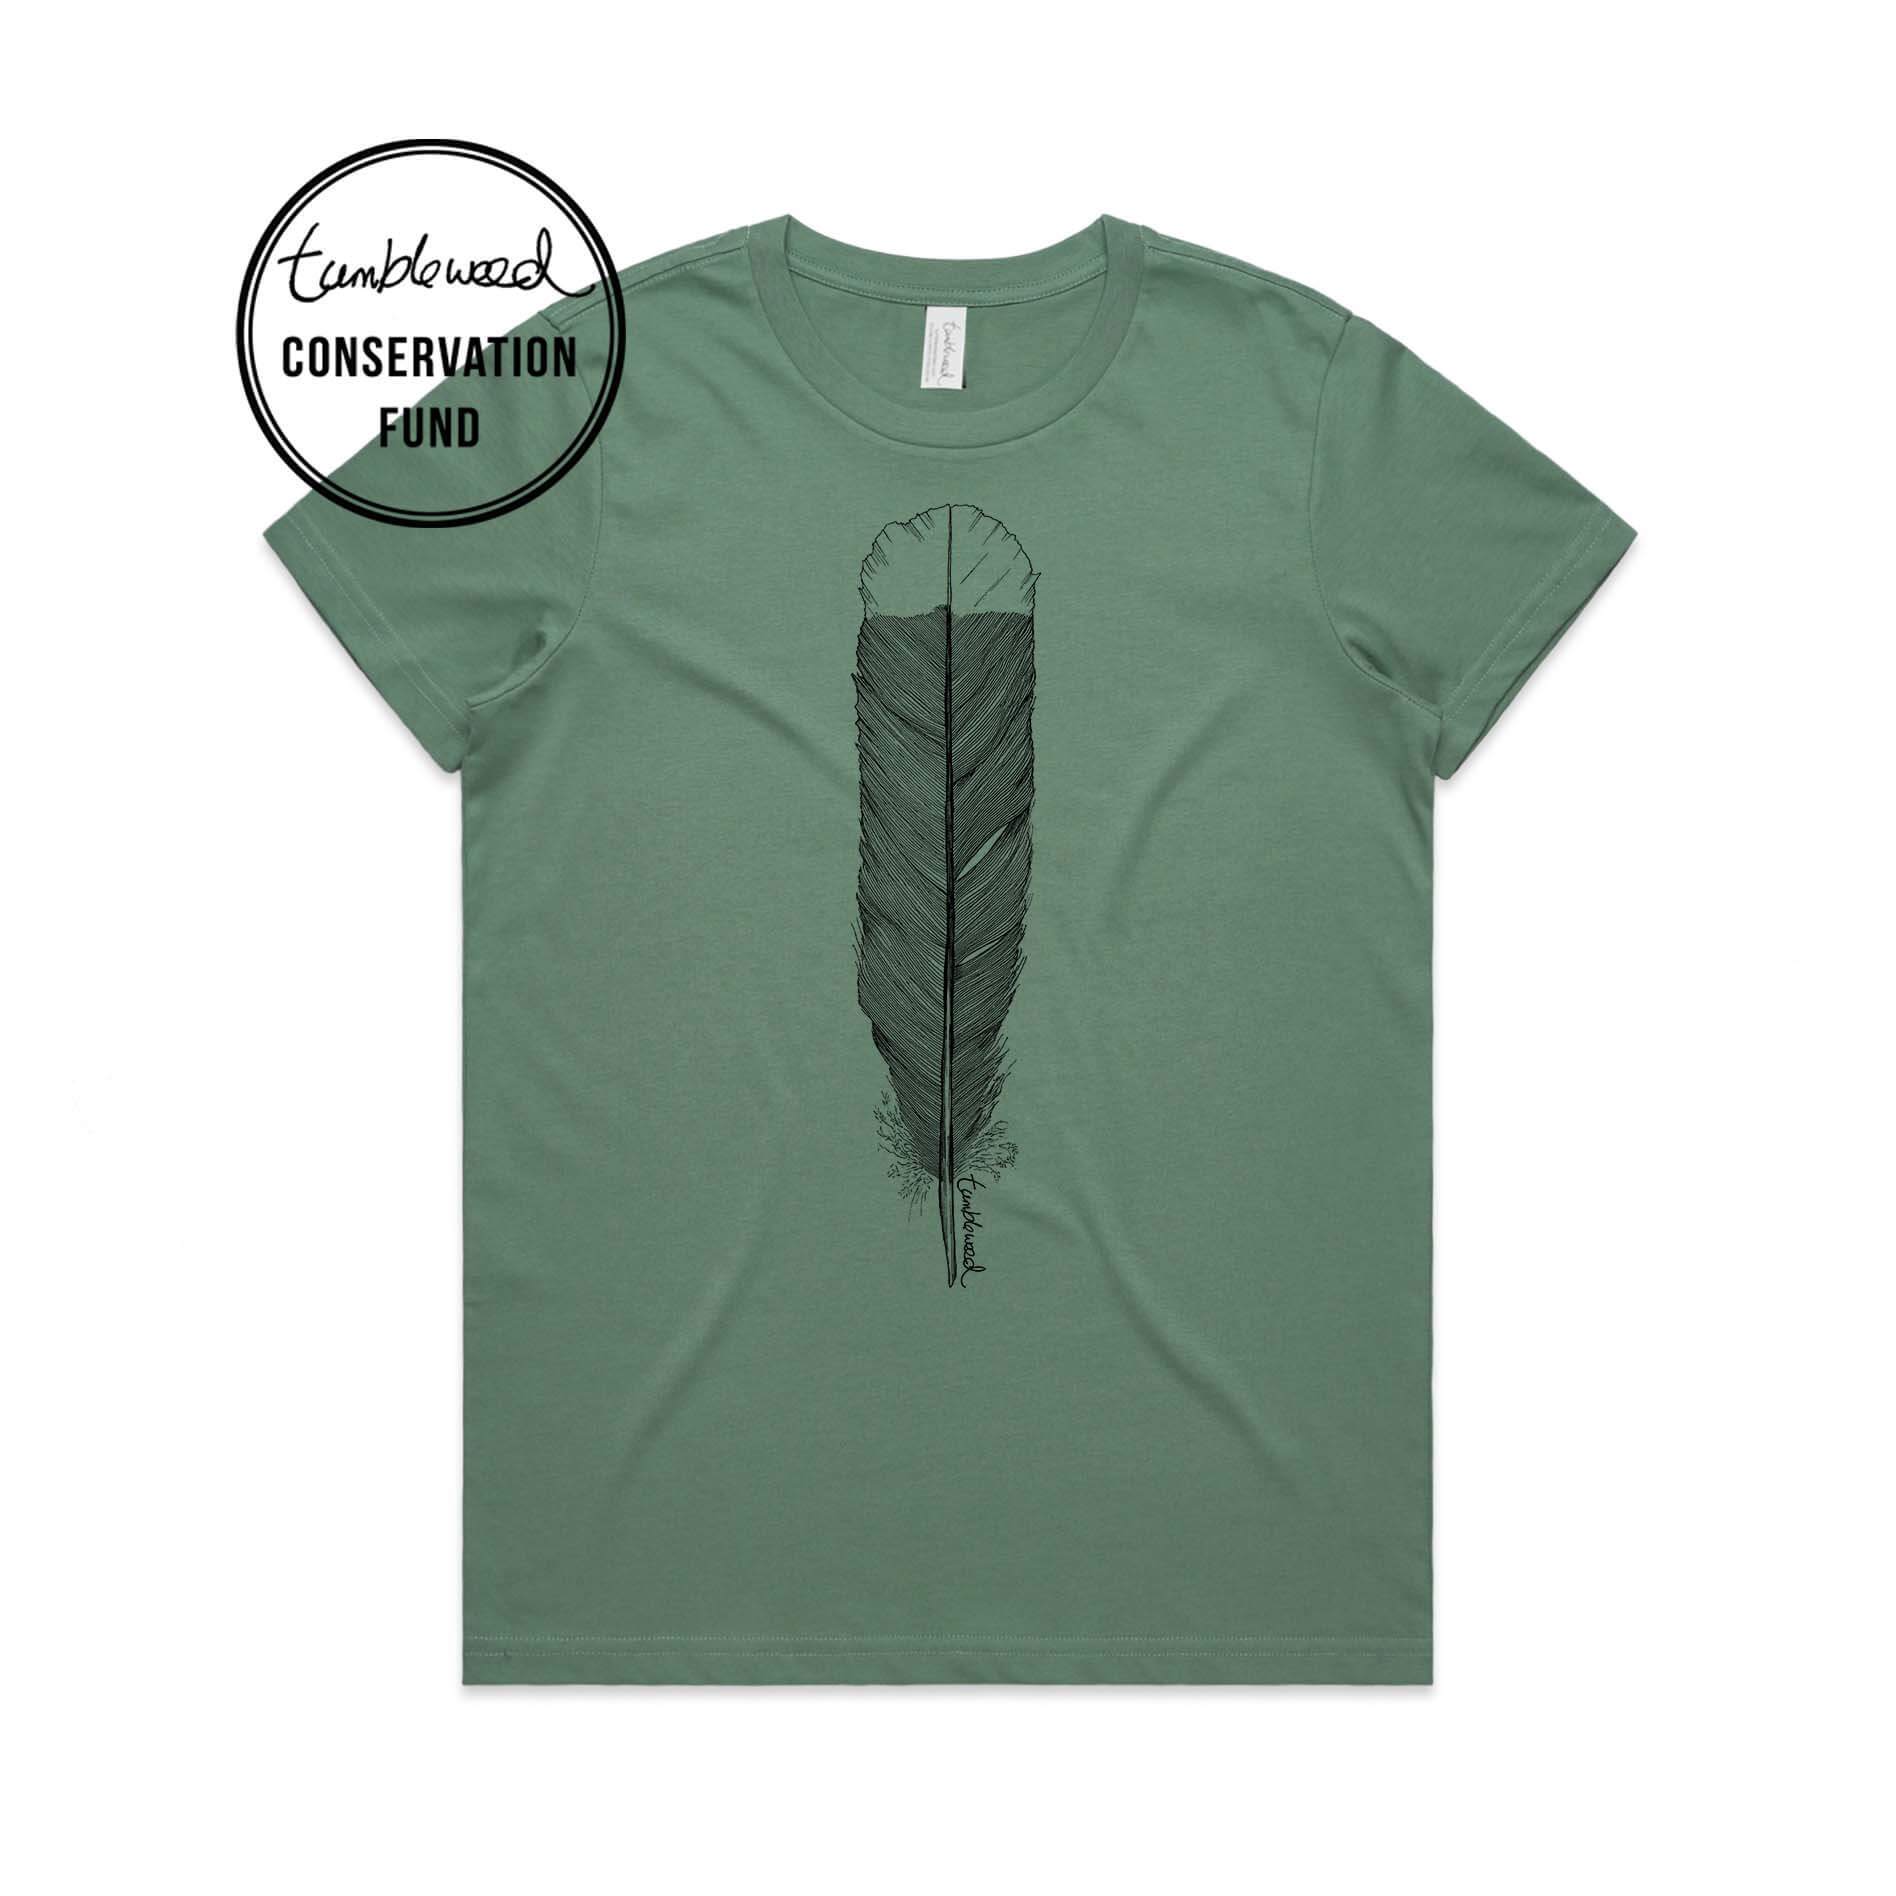 Sage, female t-shirt featuring a screen printed huia feather design.